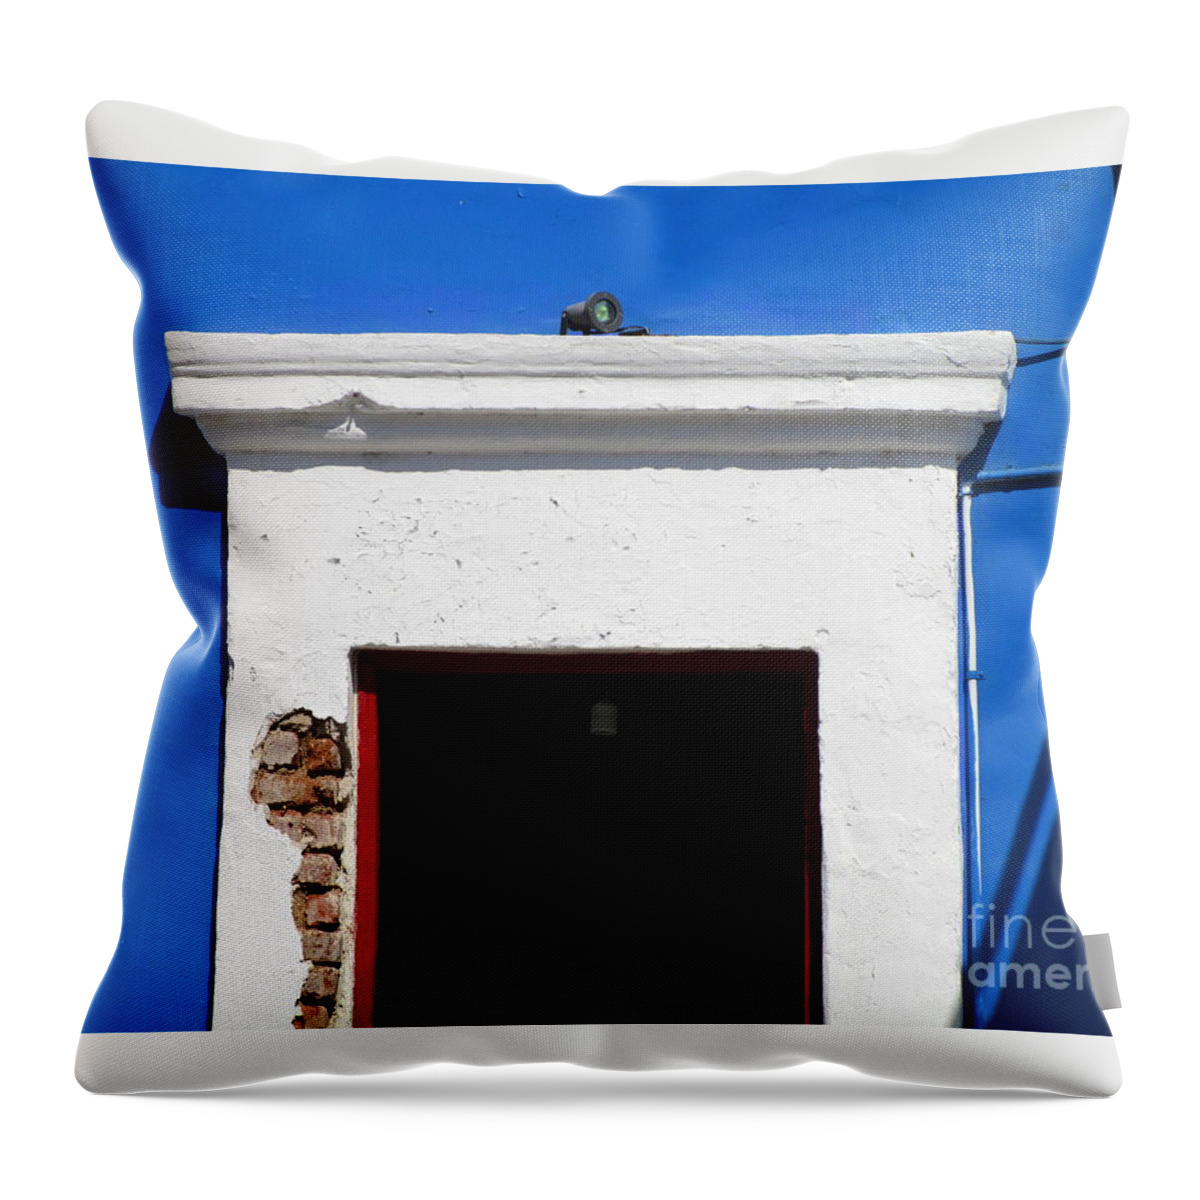 San Jose Del Cabo Throw Pillow featuring the photograph San Jose Del Cabo Door 5 by Randall Weidner